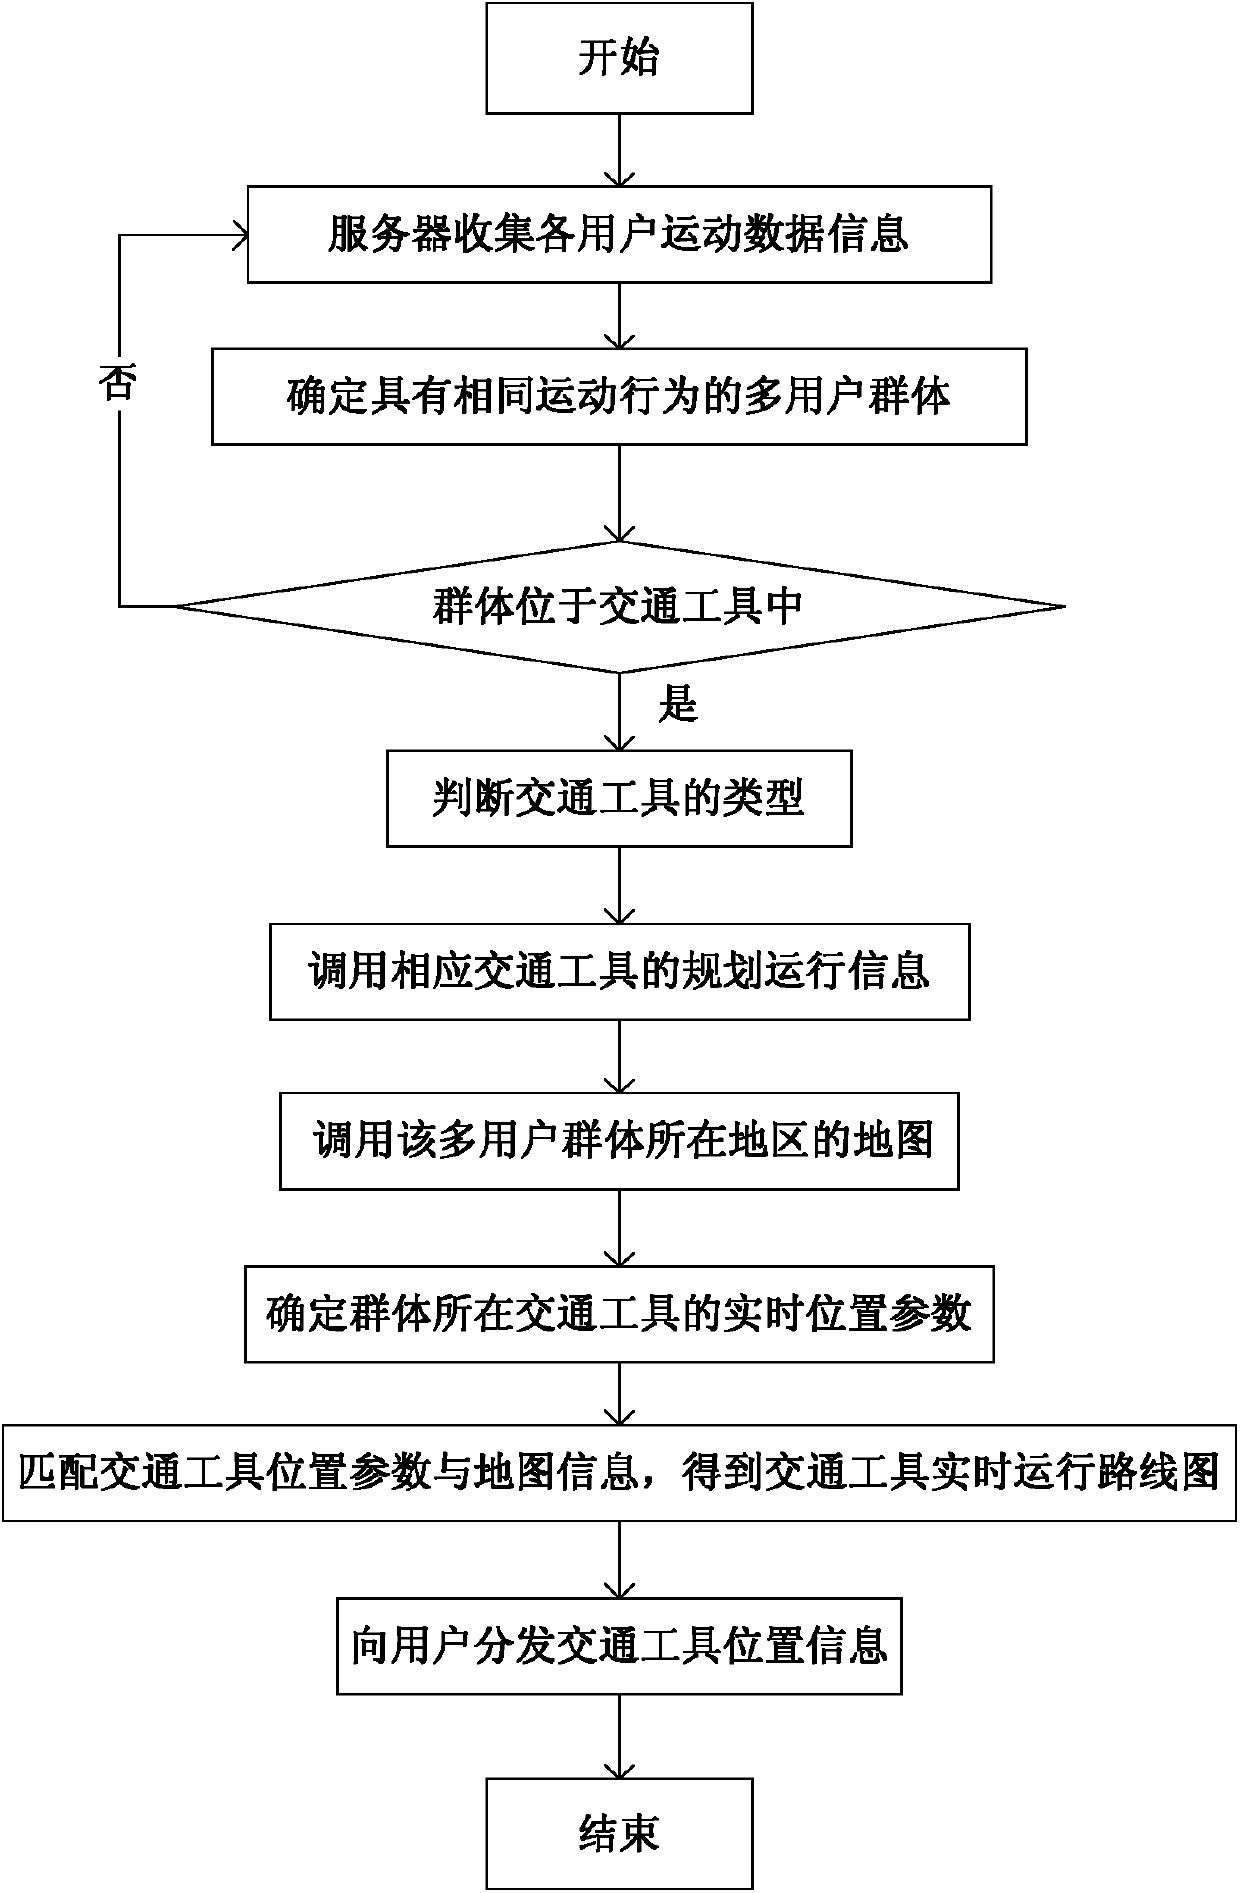 Multi-user group motion characteristic-based traffic tool positioning system and method